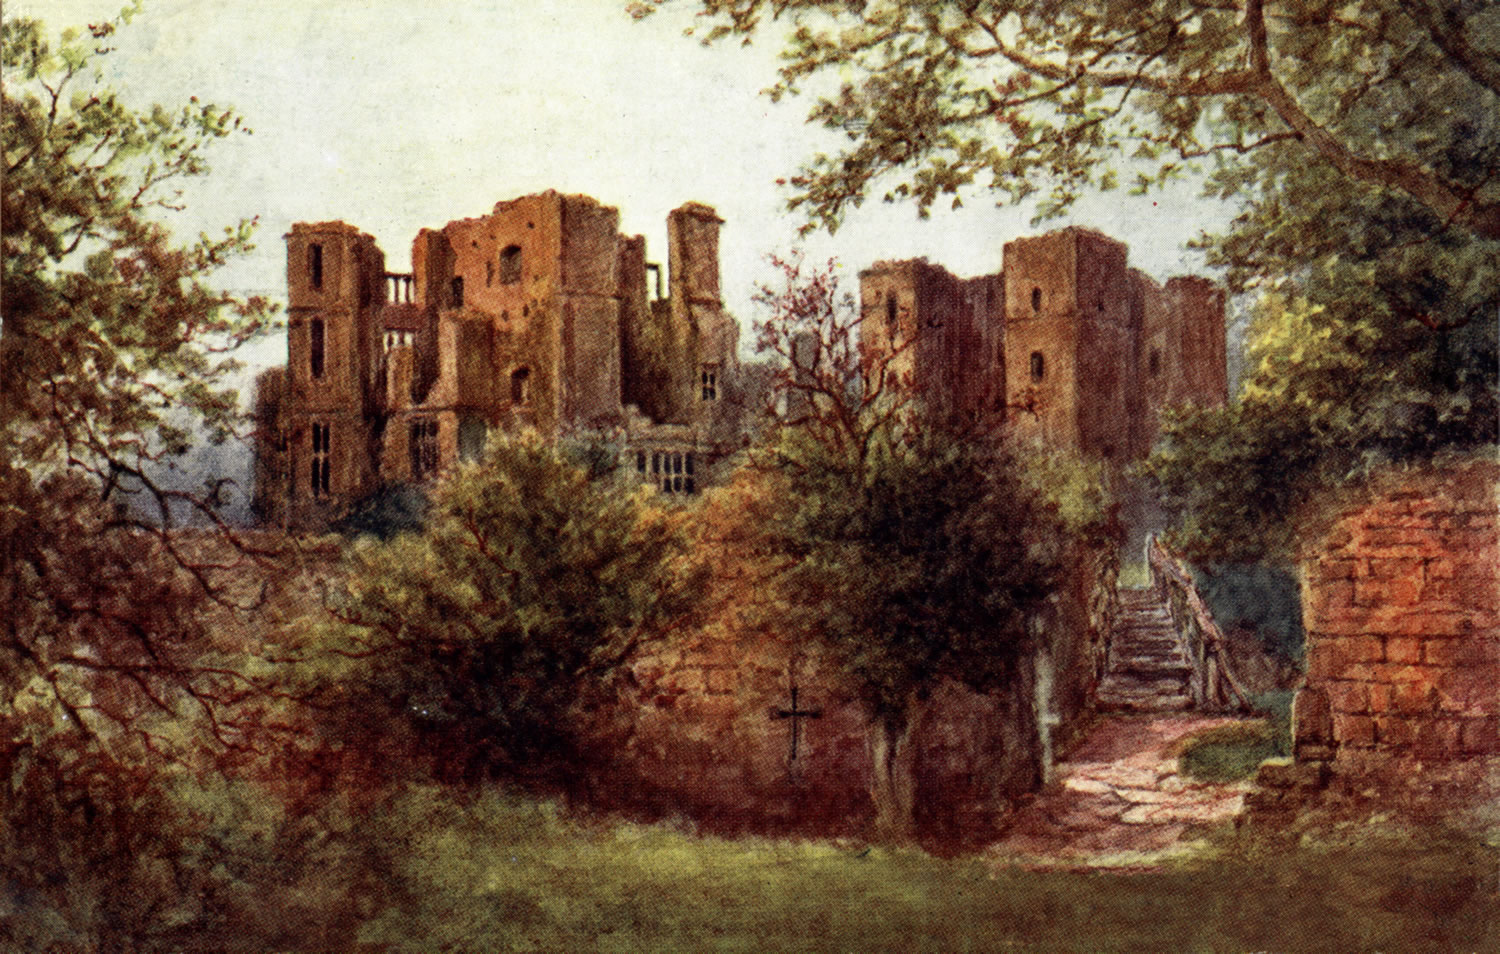 Kenilworth Castle from TheGenealogist's Image Archive